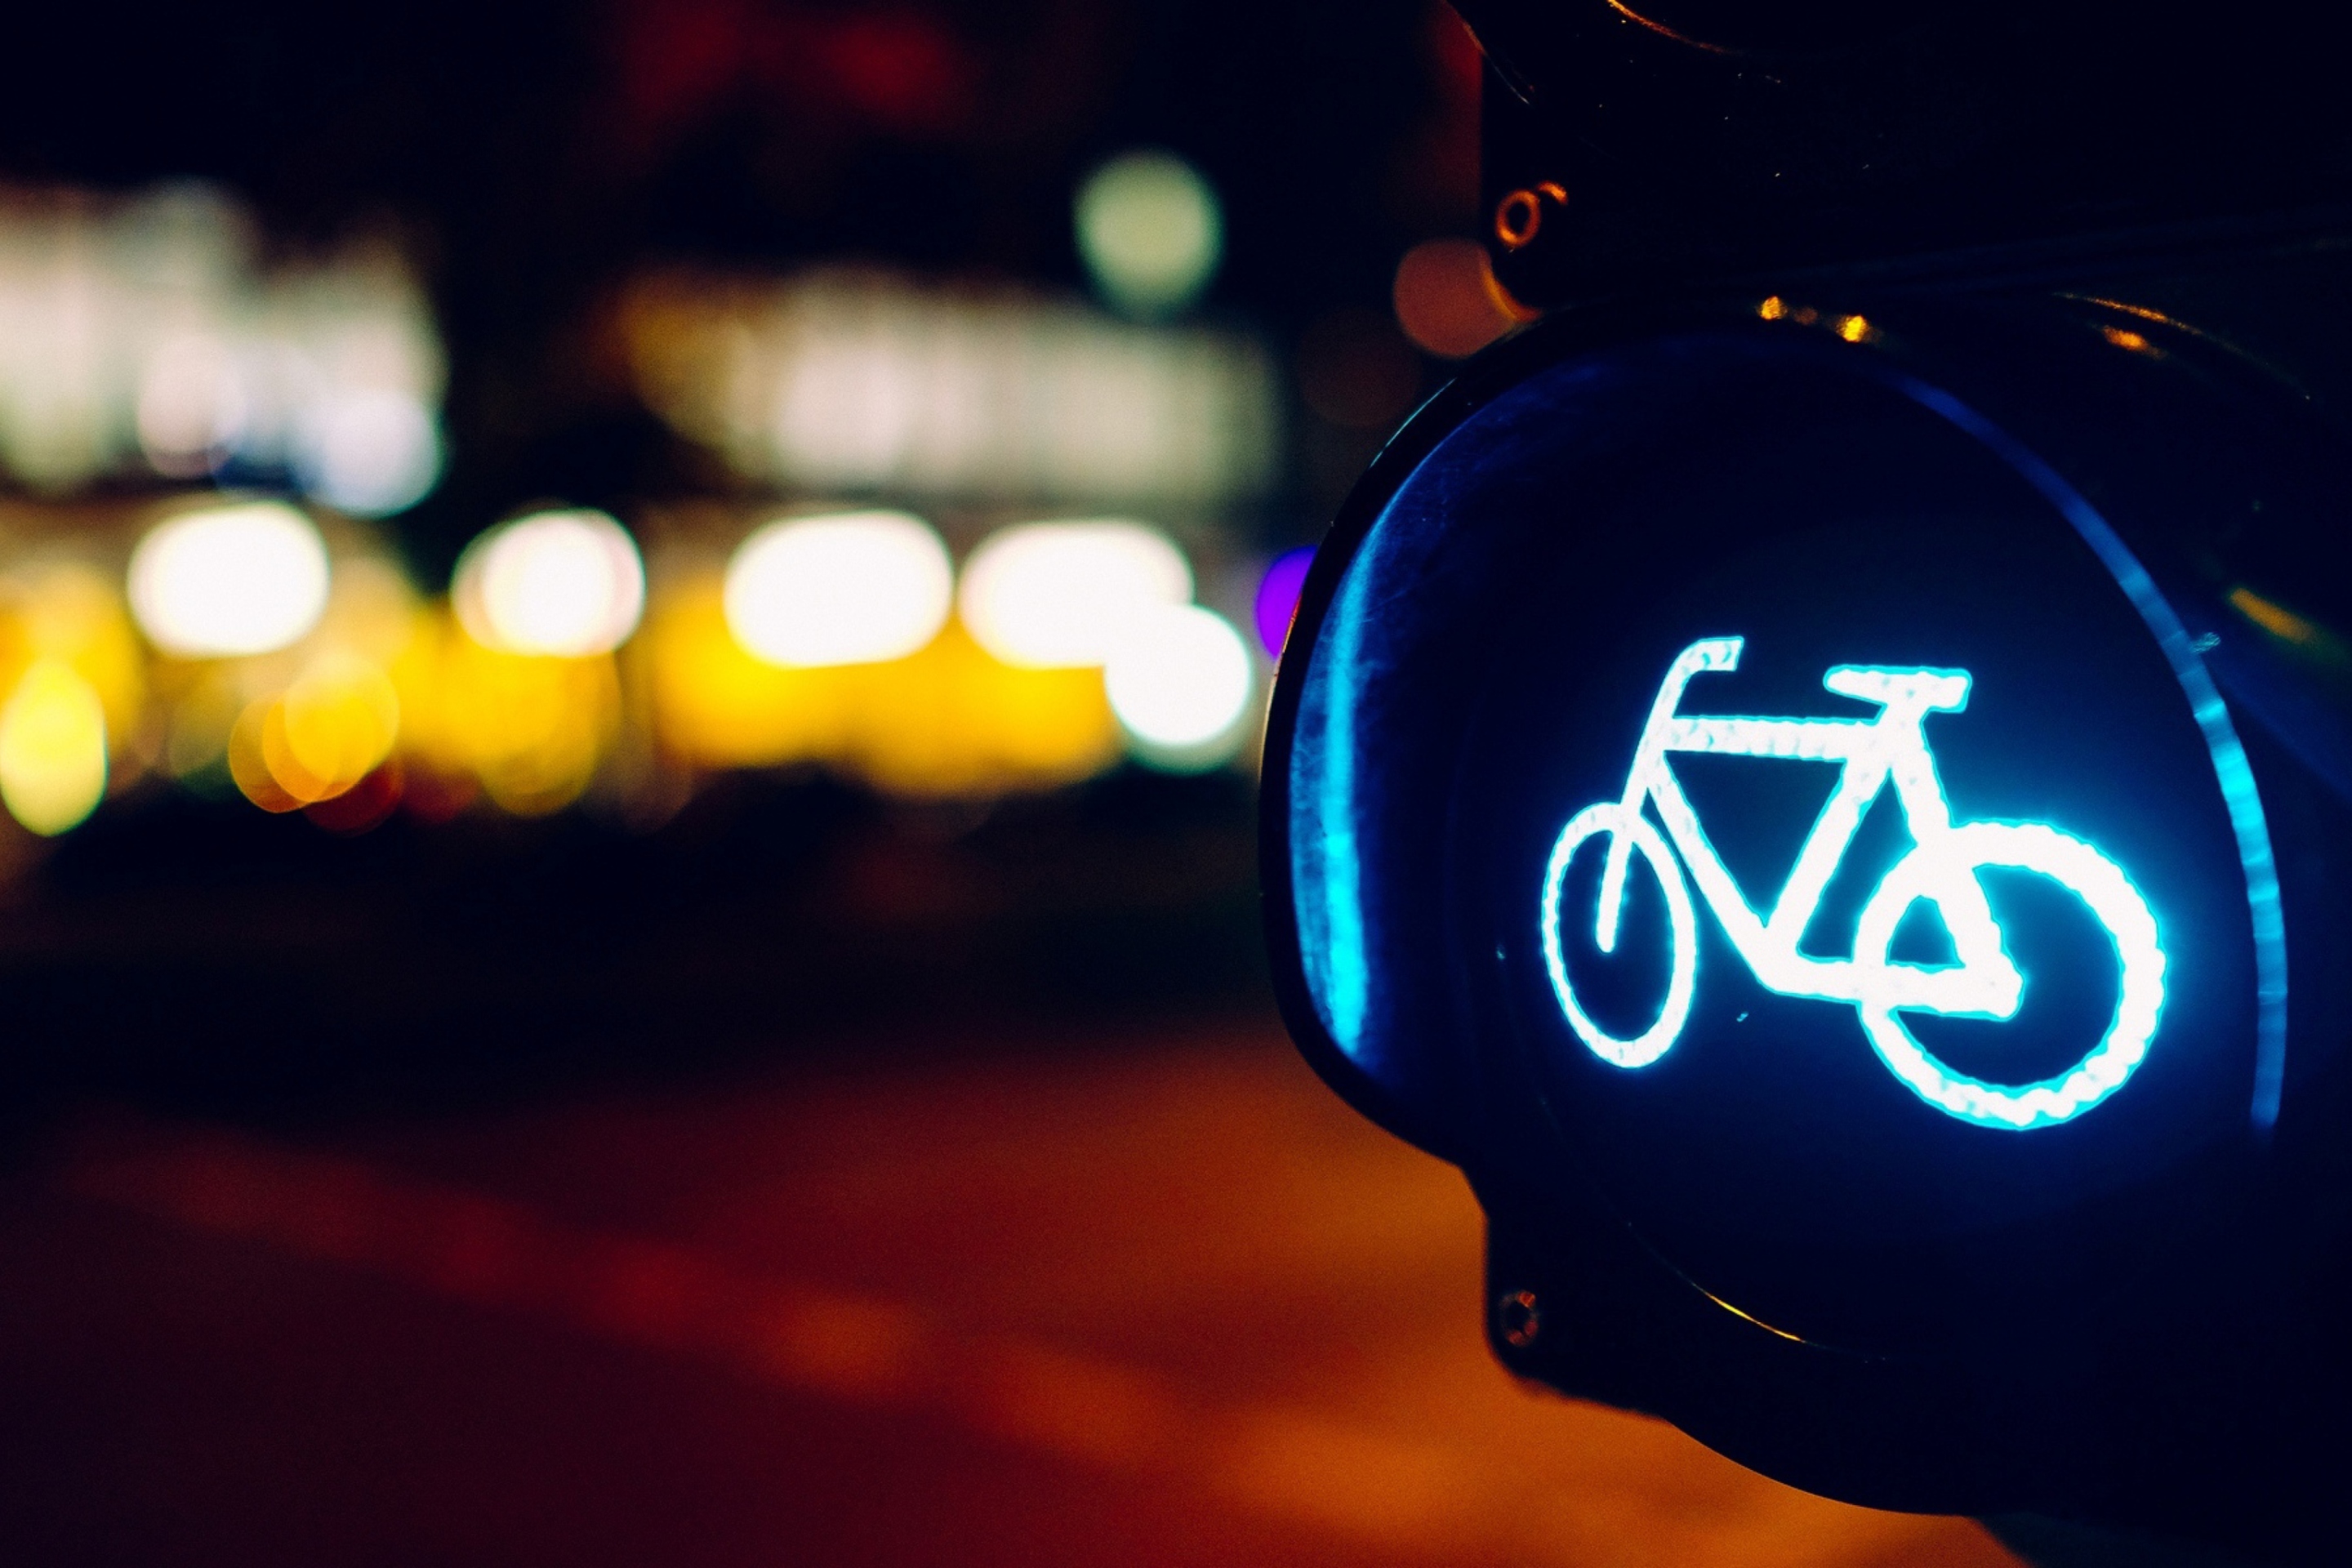 Bicycles Allowed wallpaper 2880x1920